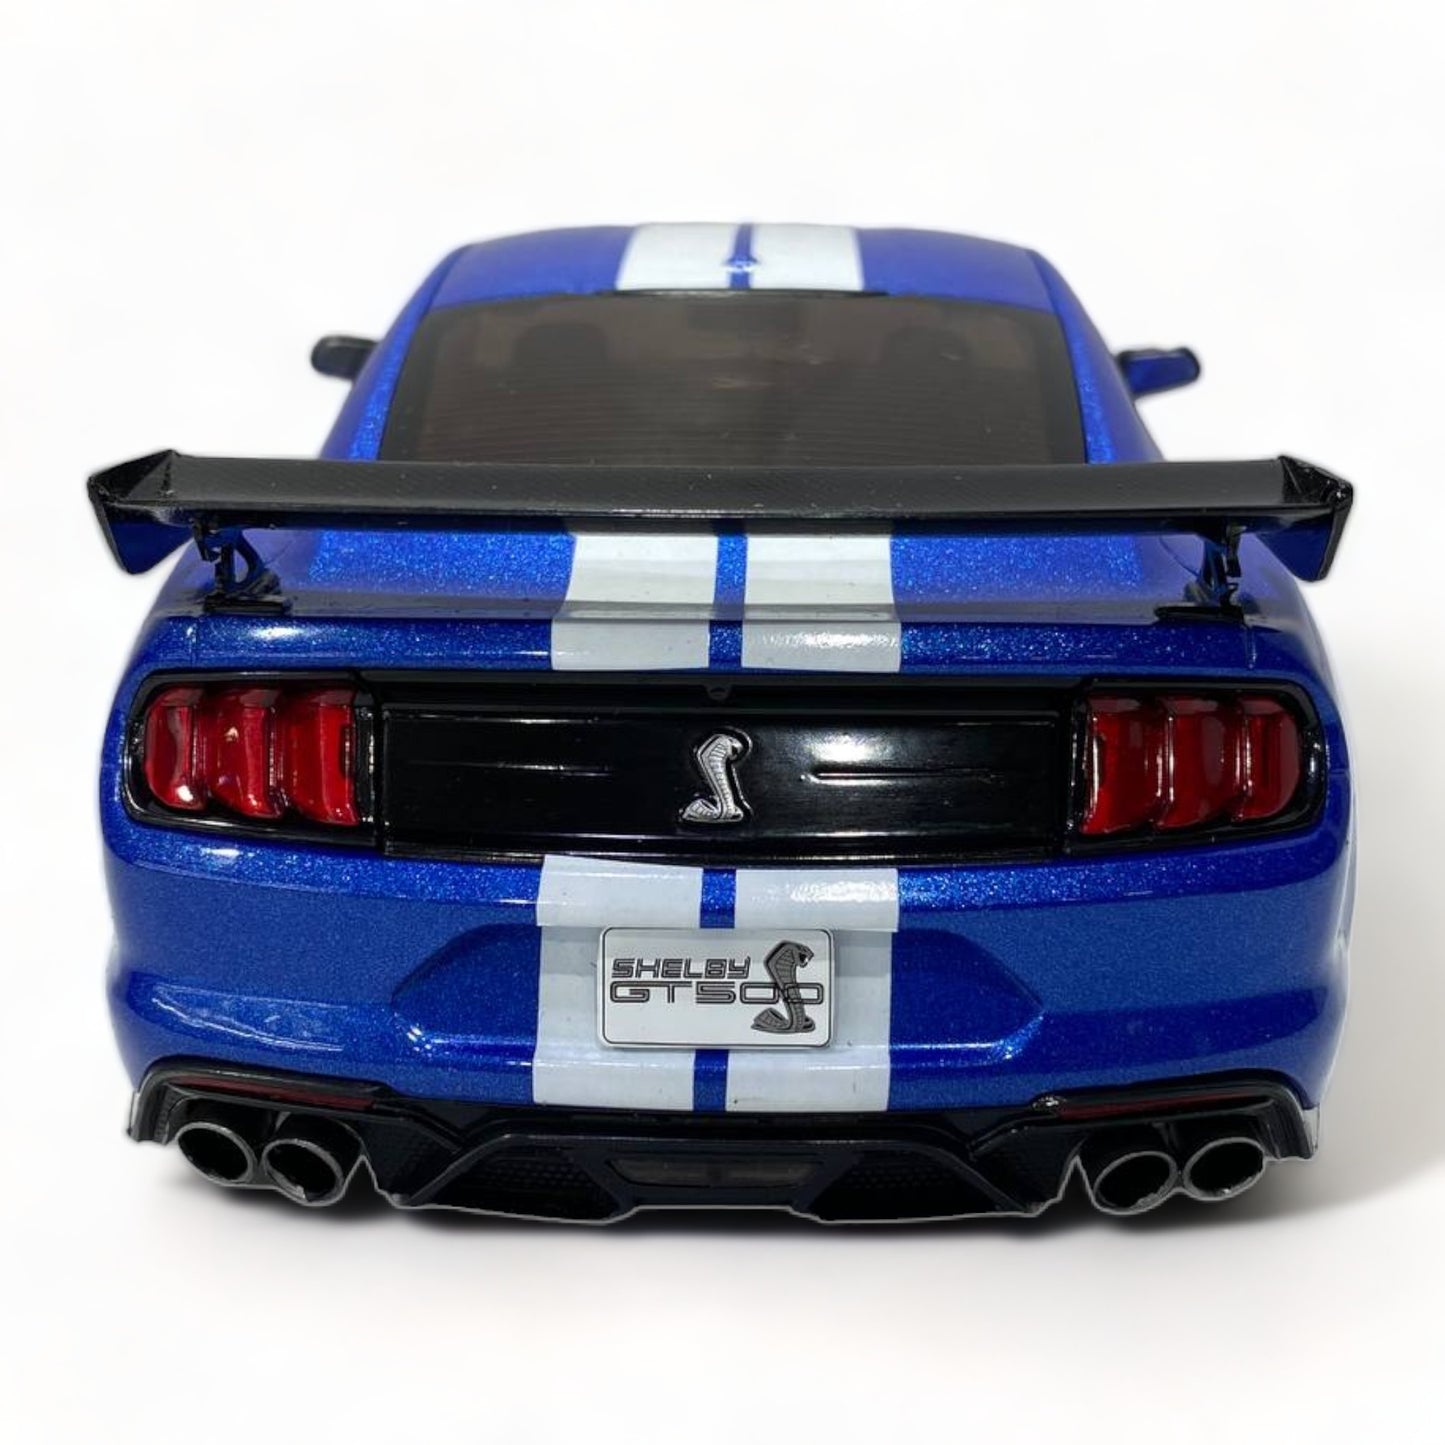 1/18 Solido Metal Diecast - Ford Shelby GT500 (2020) in Striking Blue|Sold in Dturman.com Dubai UAE.